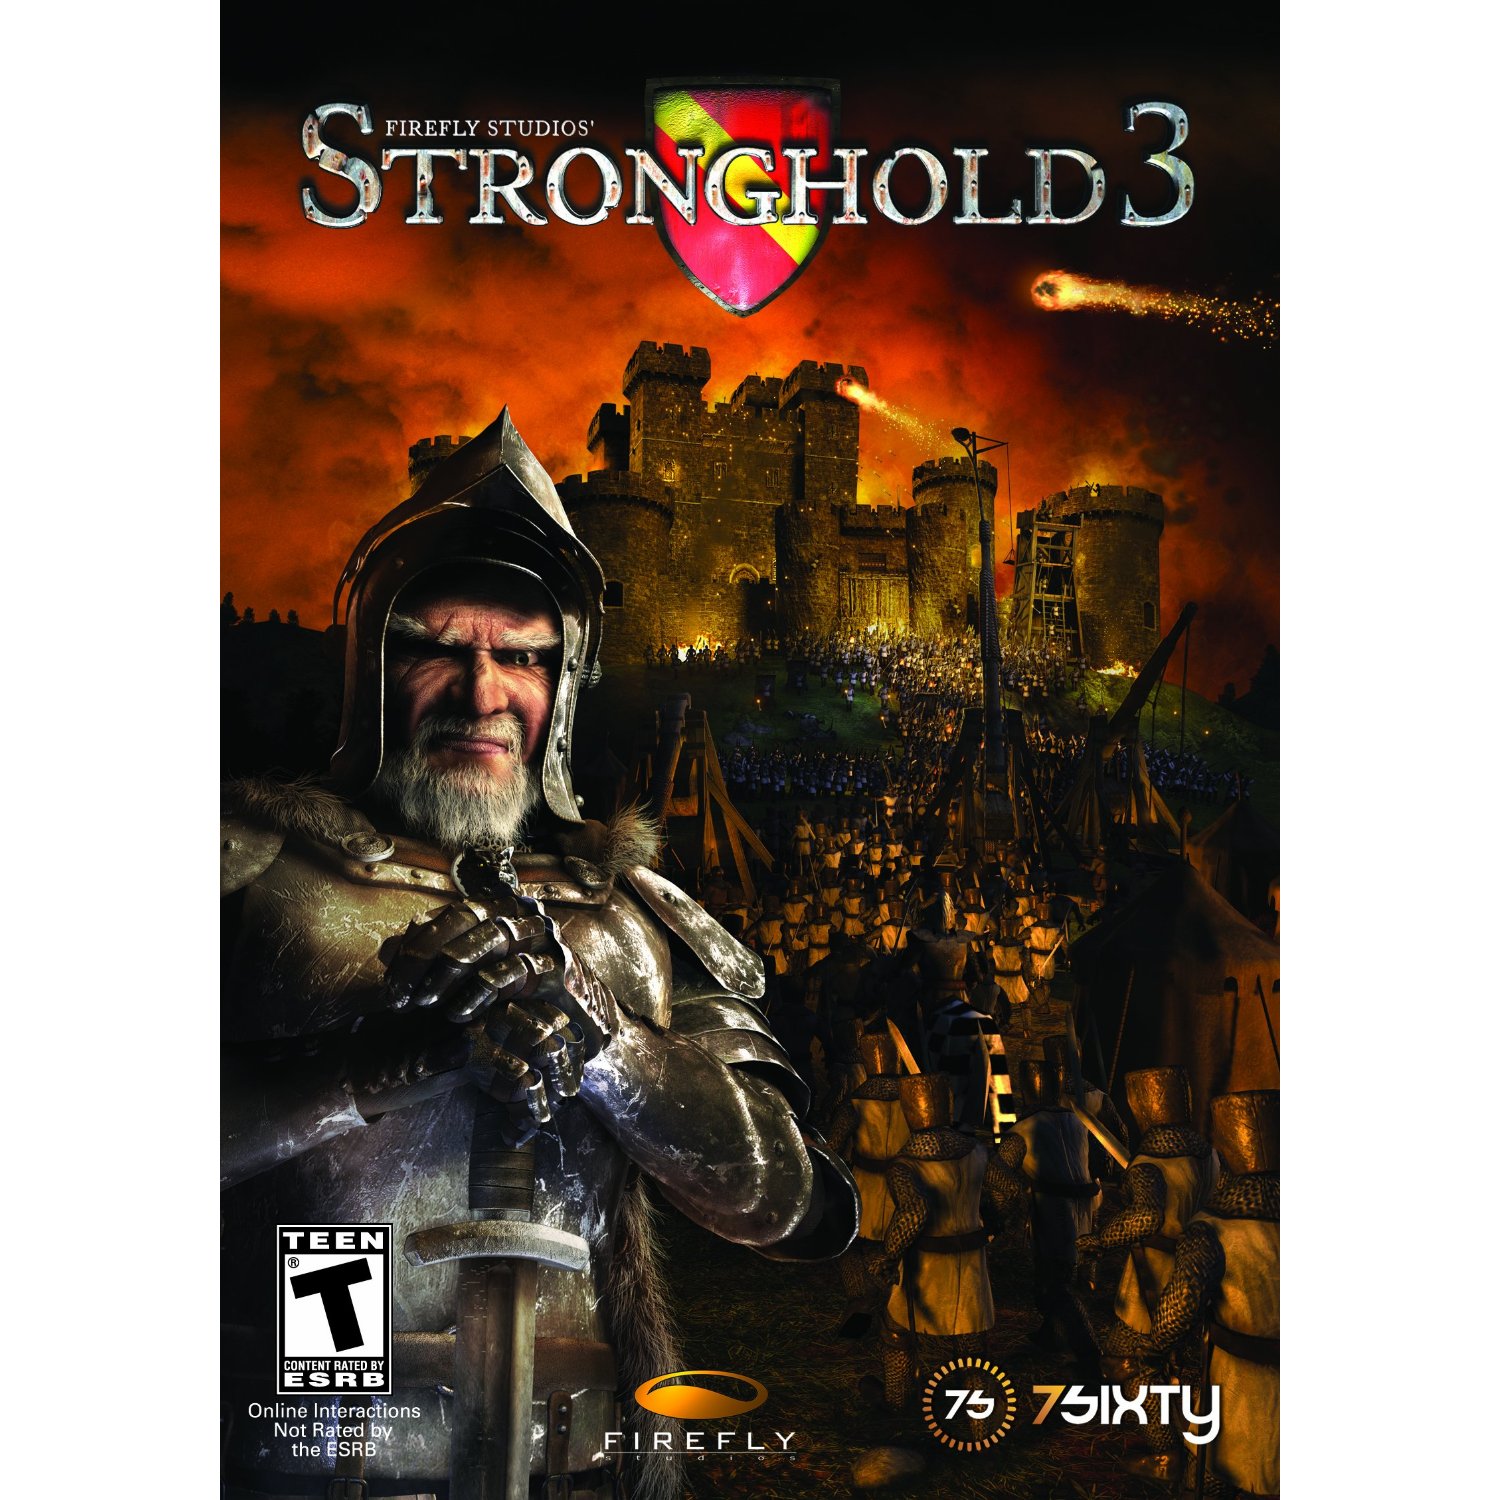 http://thetechjournal.com/wp-content/uploads/images/1110/1319511406-stronghold-3--pc-game-available-from-today-at-amazon-1.jpg